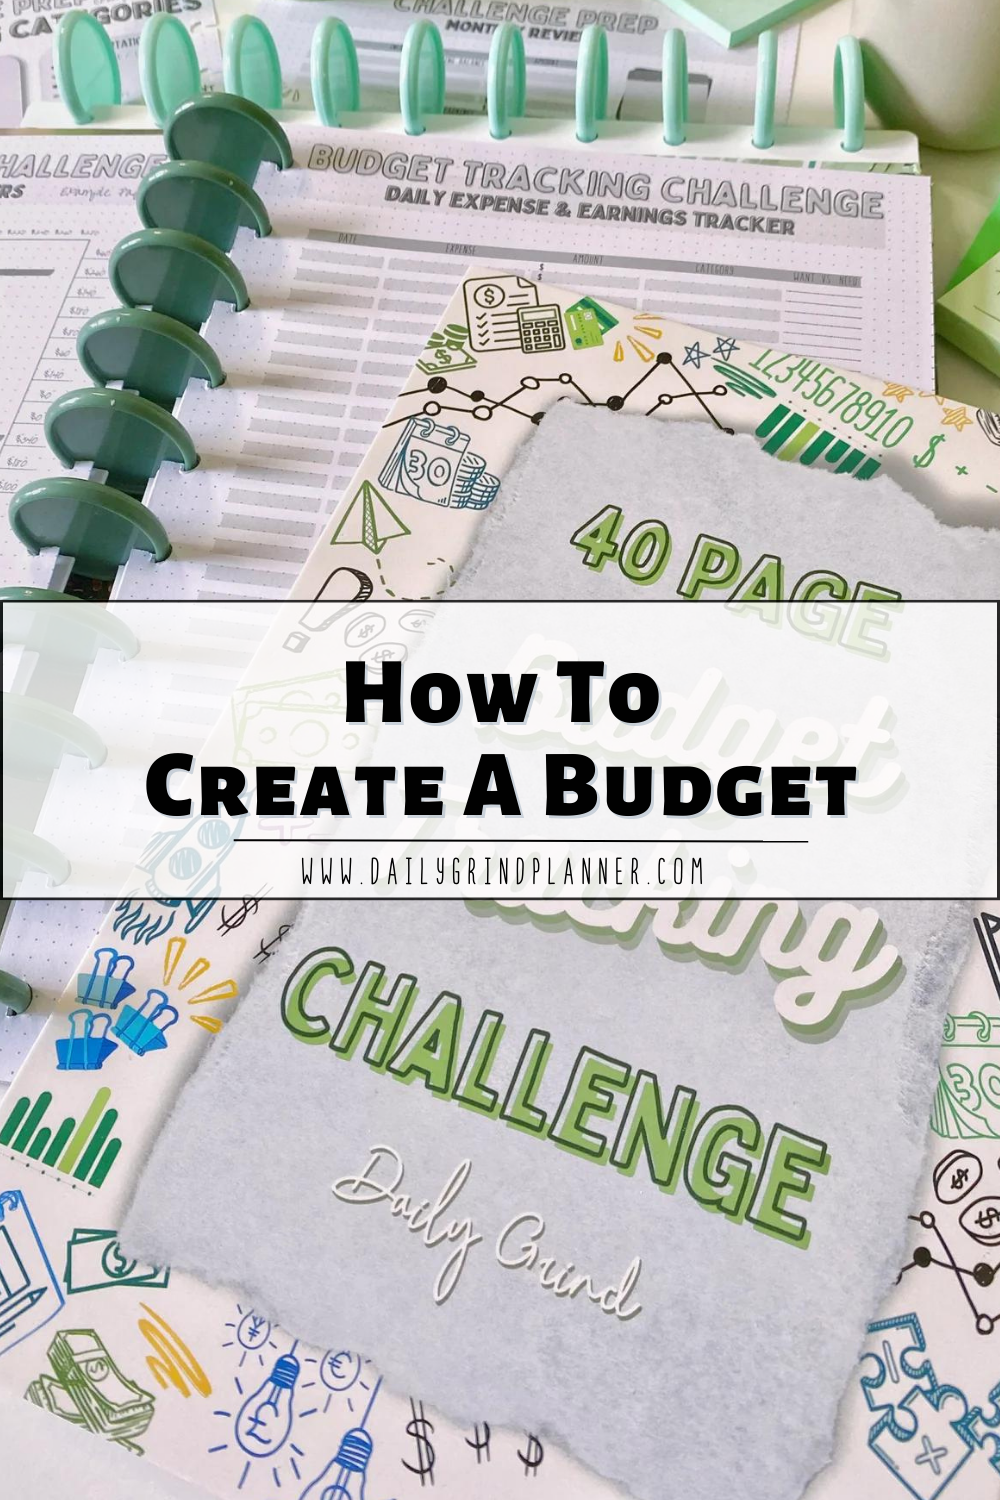 "How to Create A Budget" text over Habit Tracker Insert